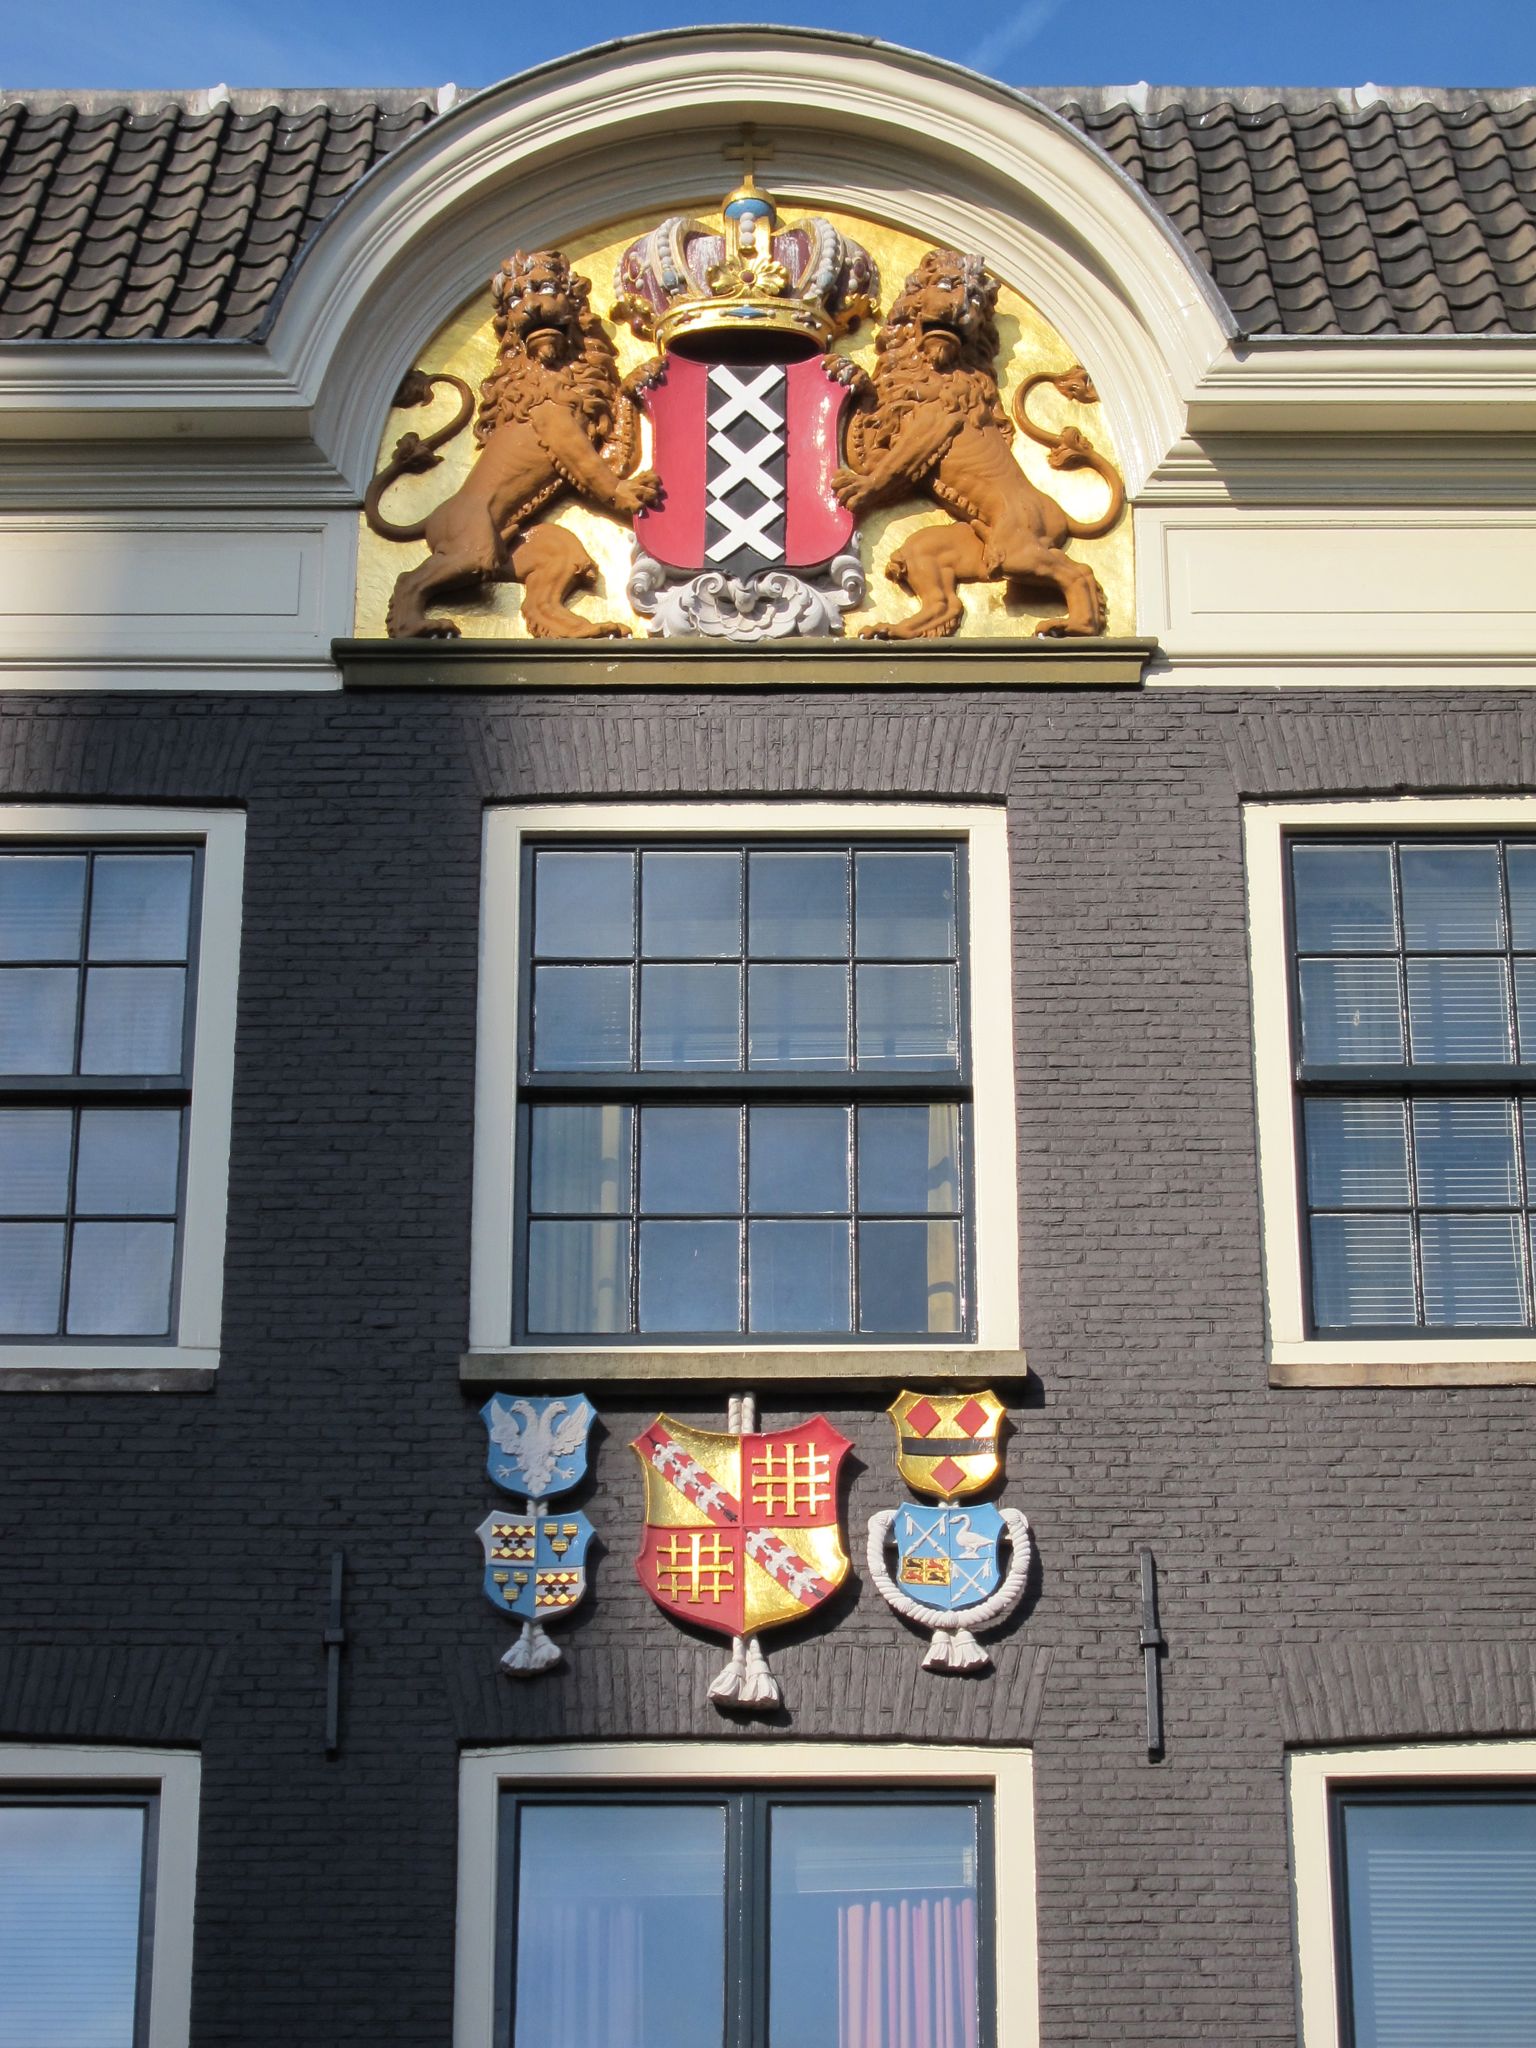 Photo 42 of 90 from the album Highlights Amsterdam 2012.